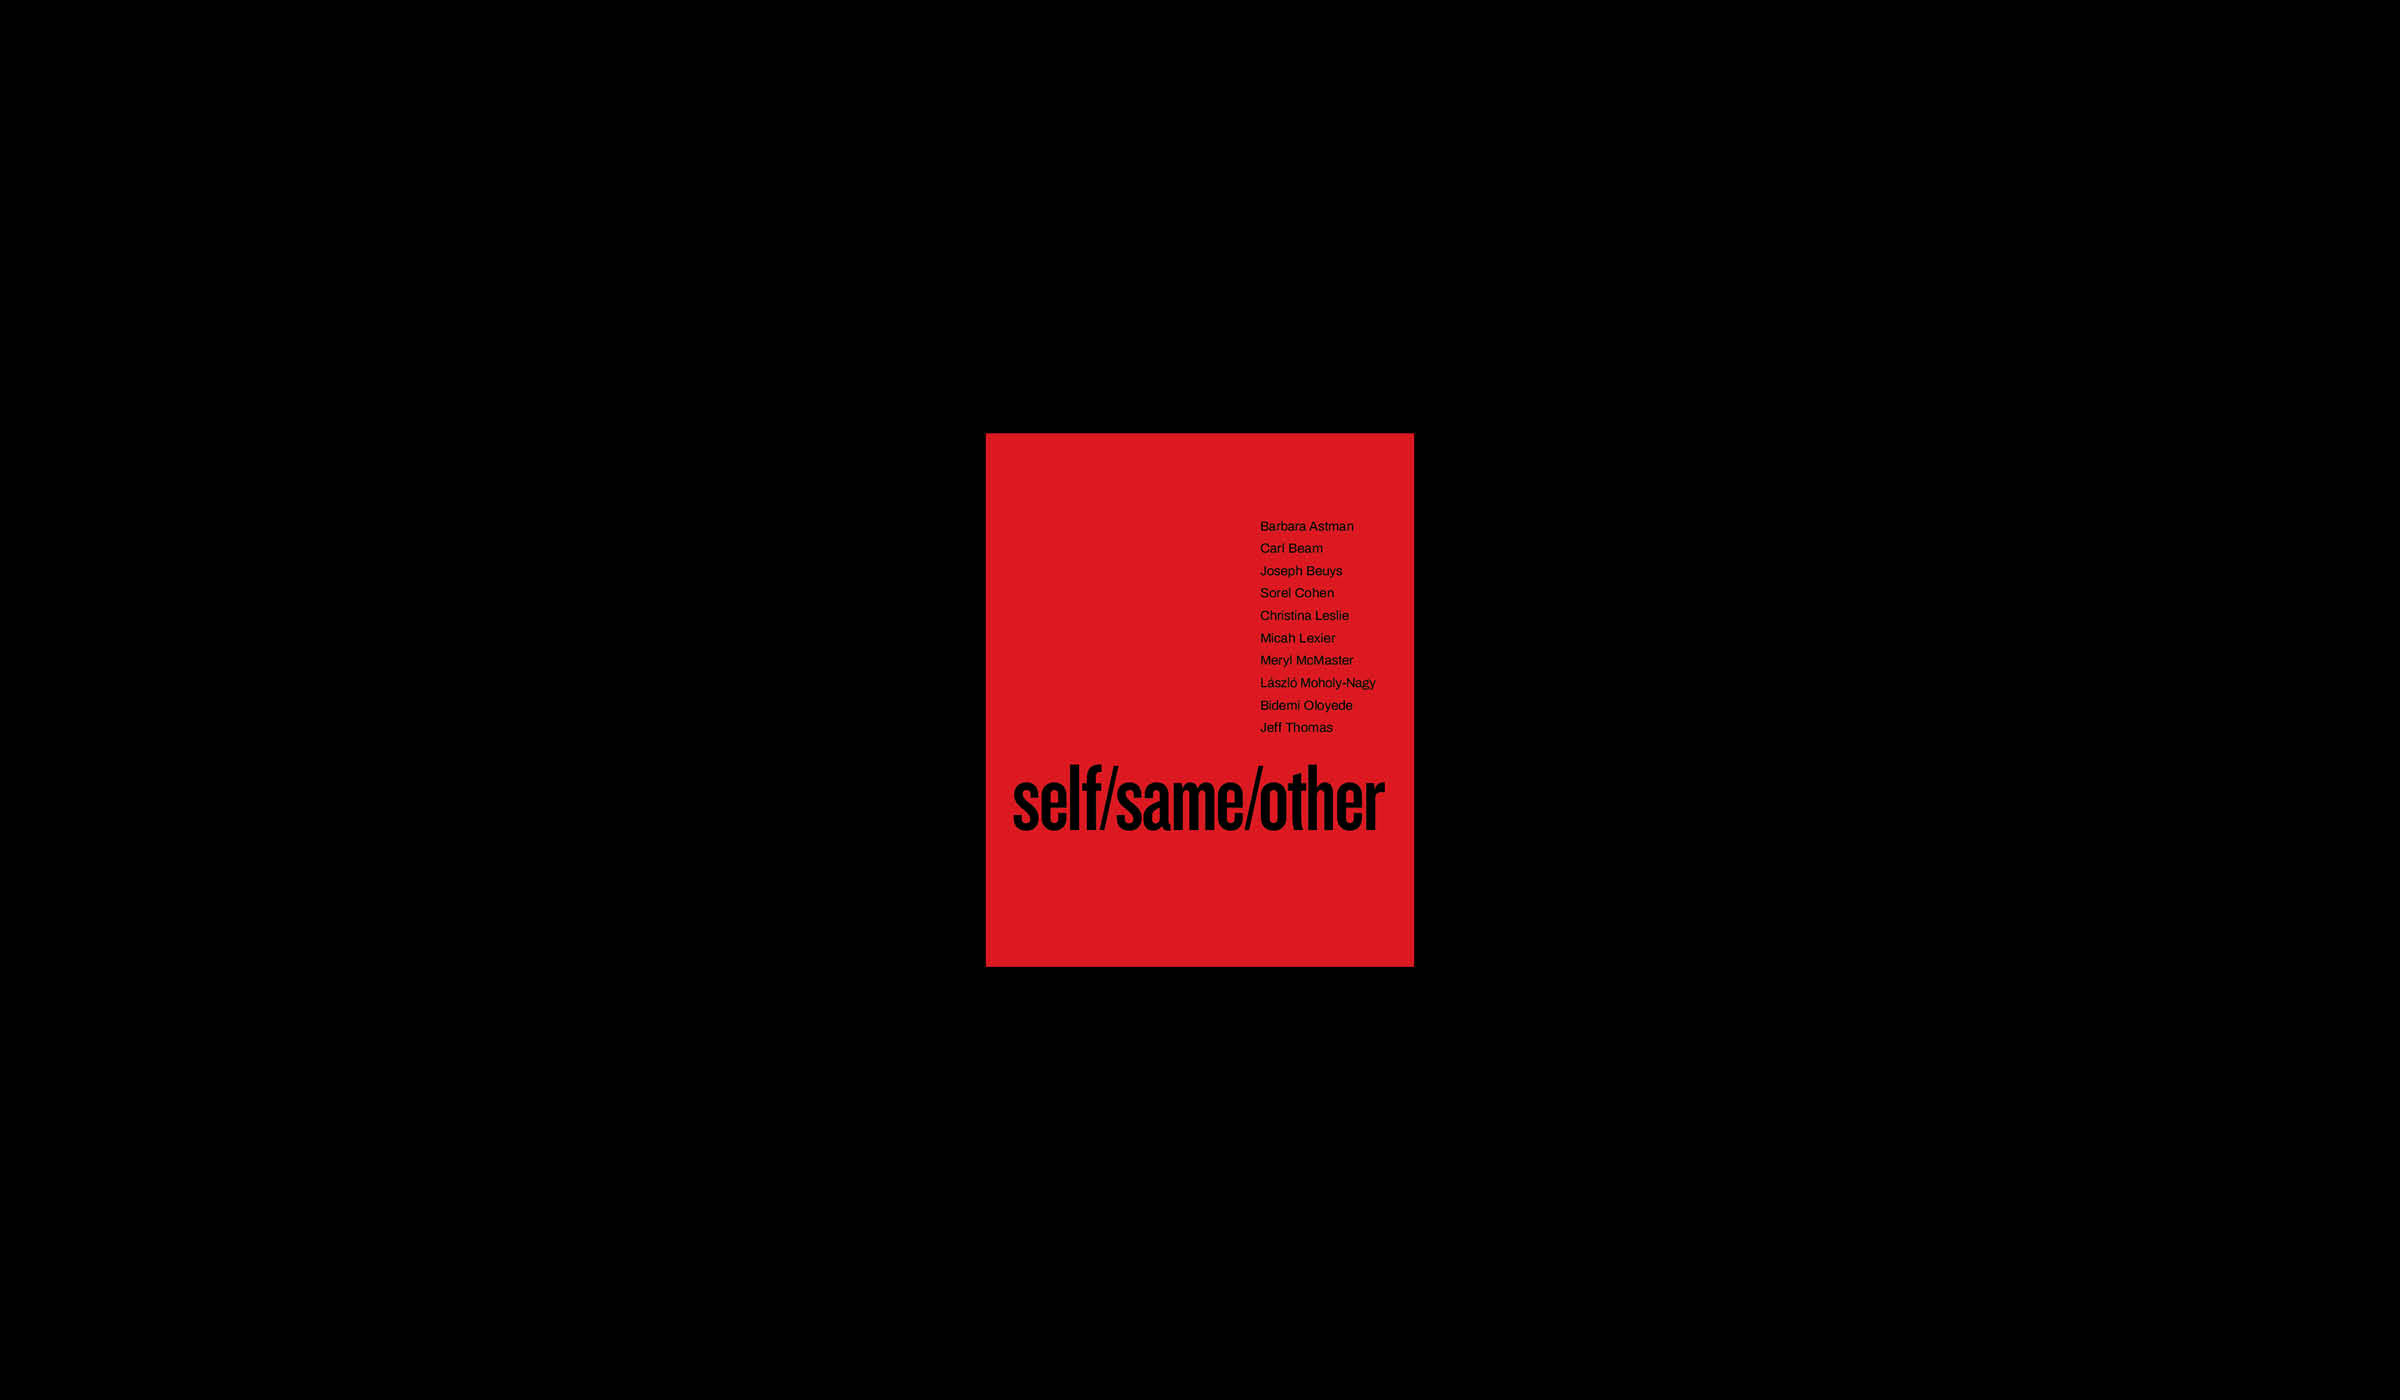 Front cover of self/same/other exhibition catalogue